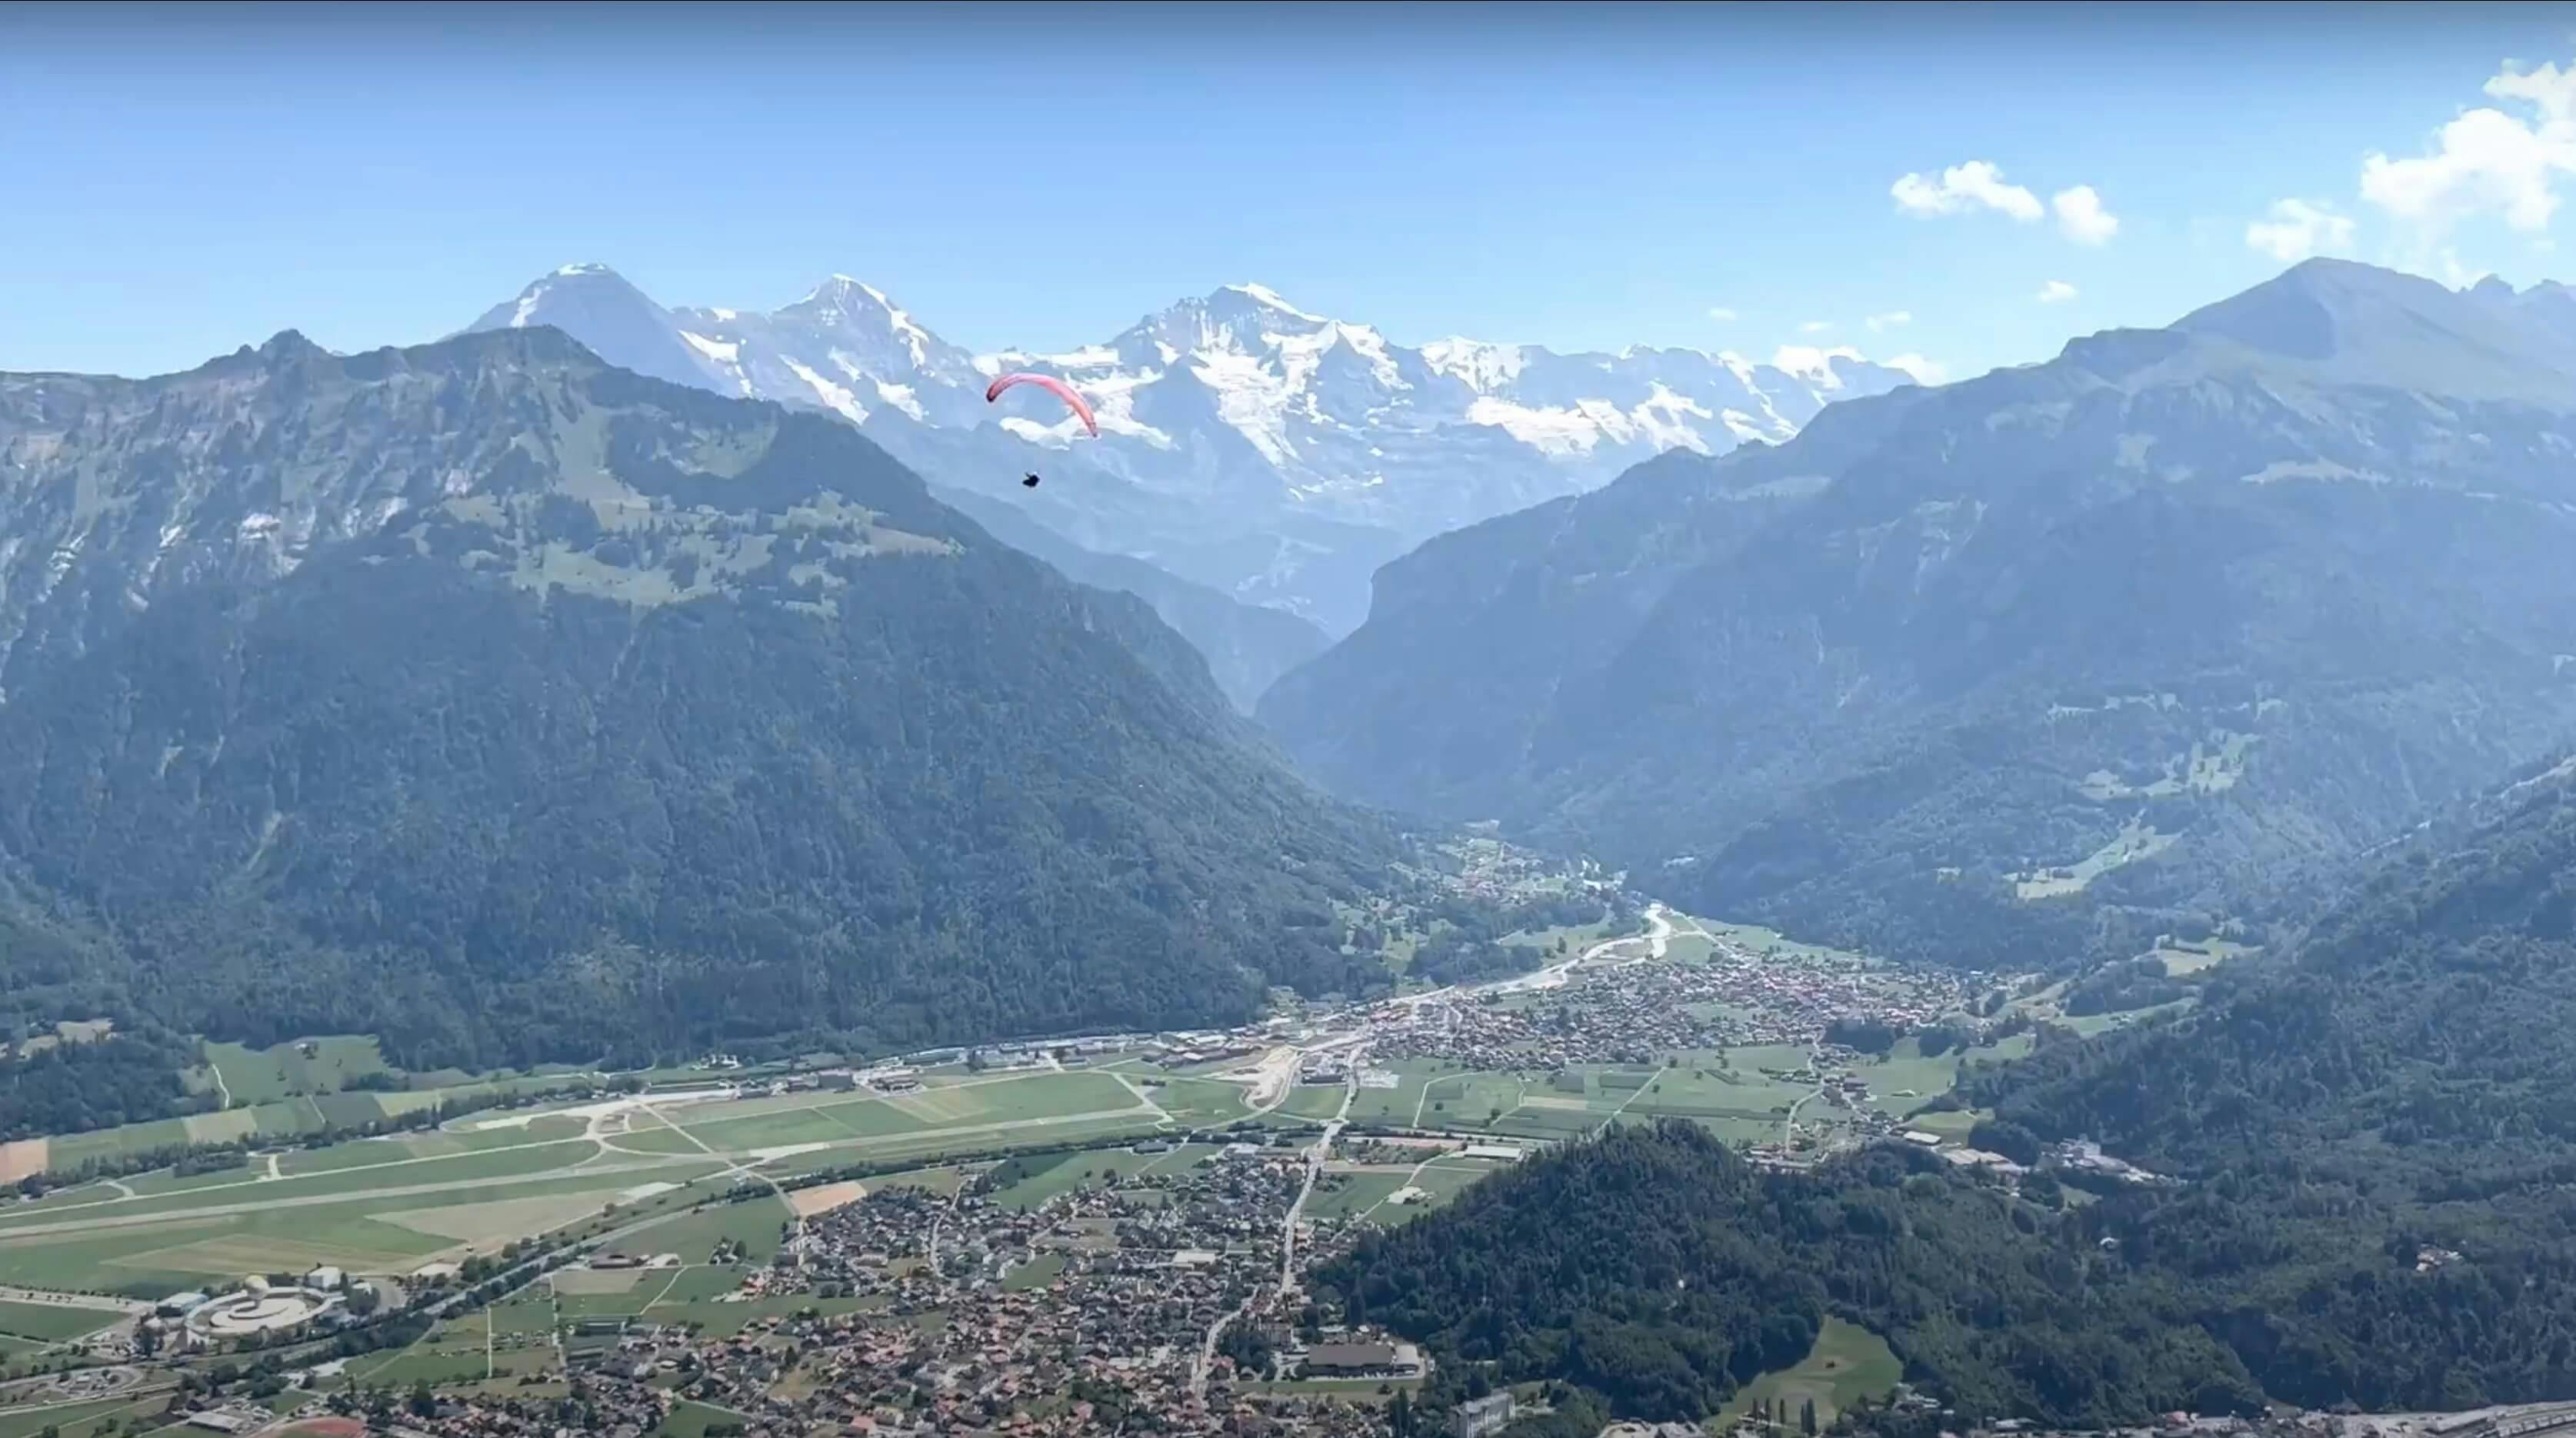 A panorama of the Swiss Alps